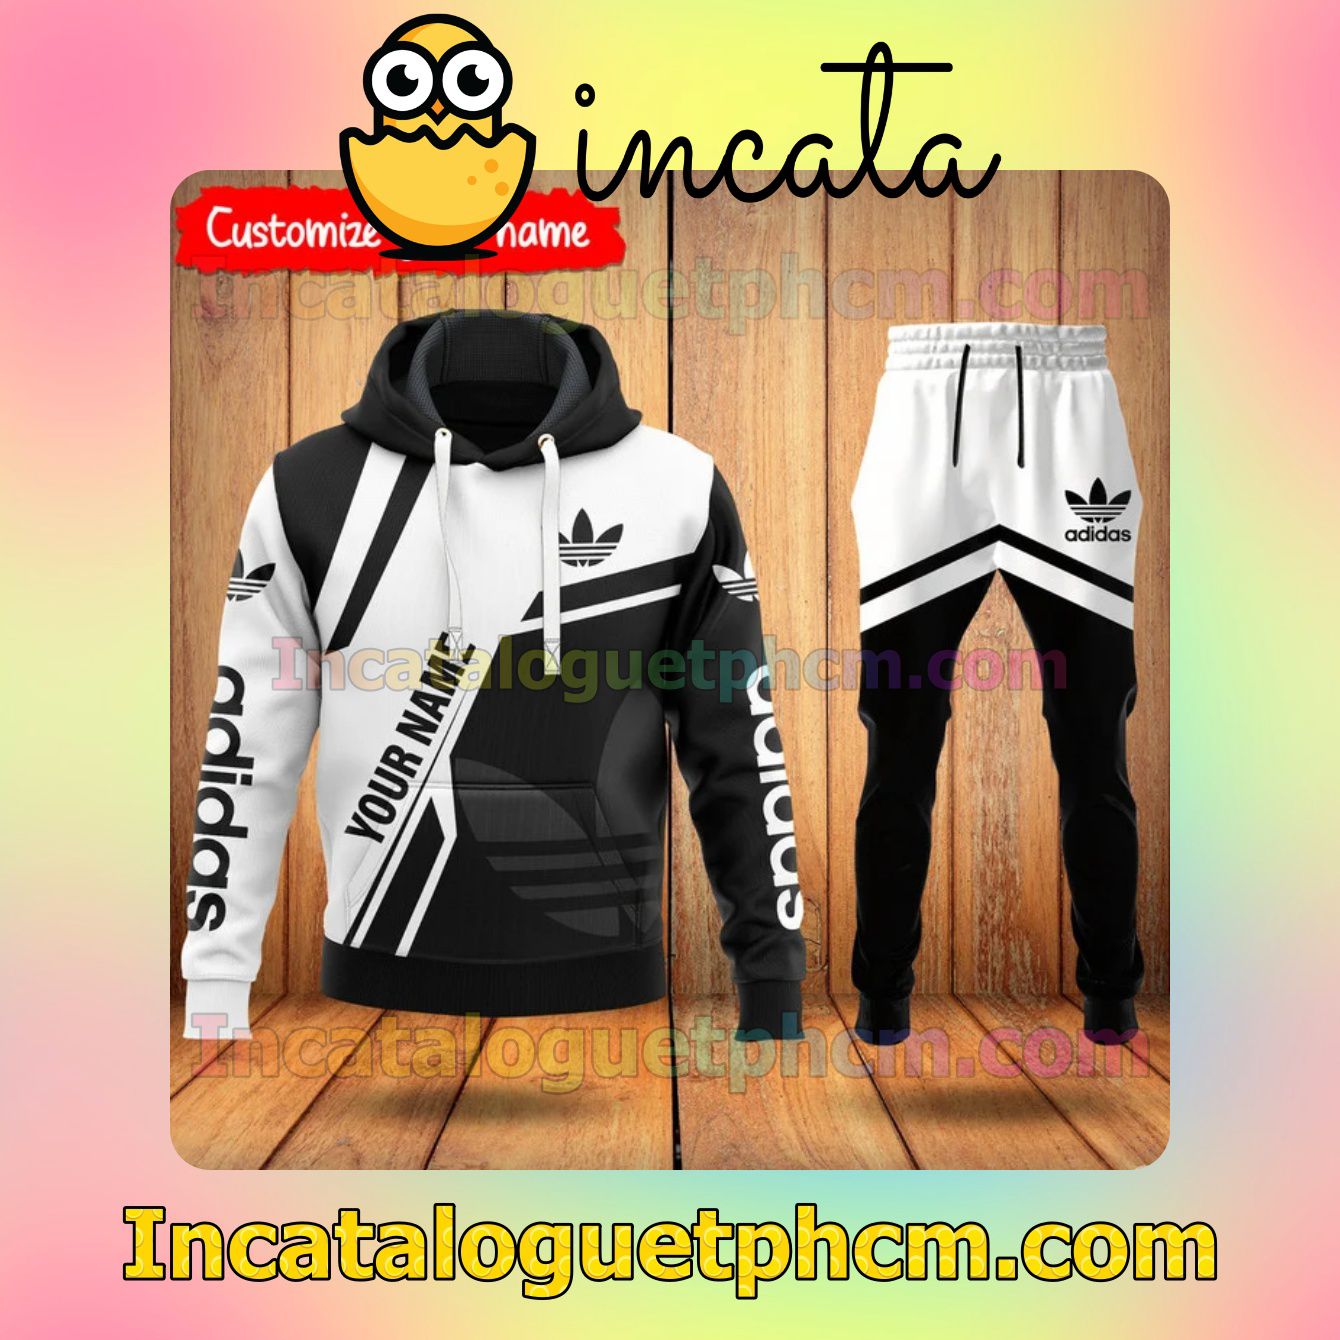 Get Here Personalized Adidas Black And White Zipper Hooded Sweatshirt And Pants